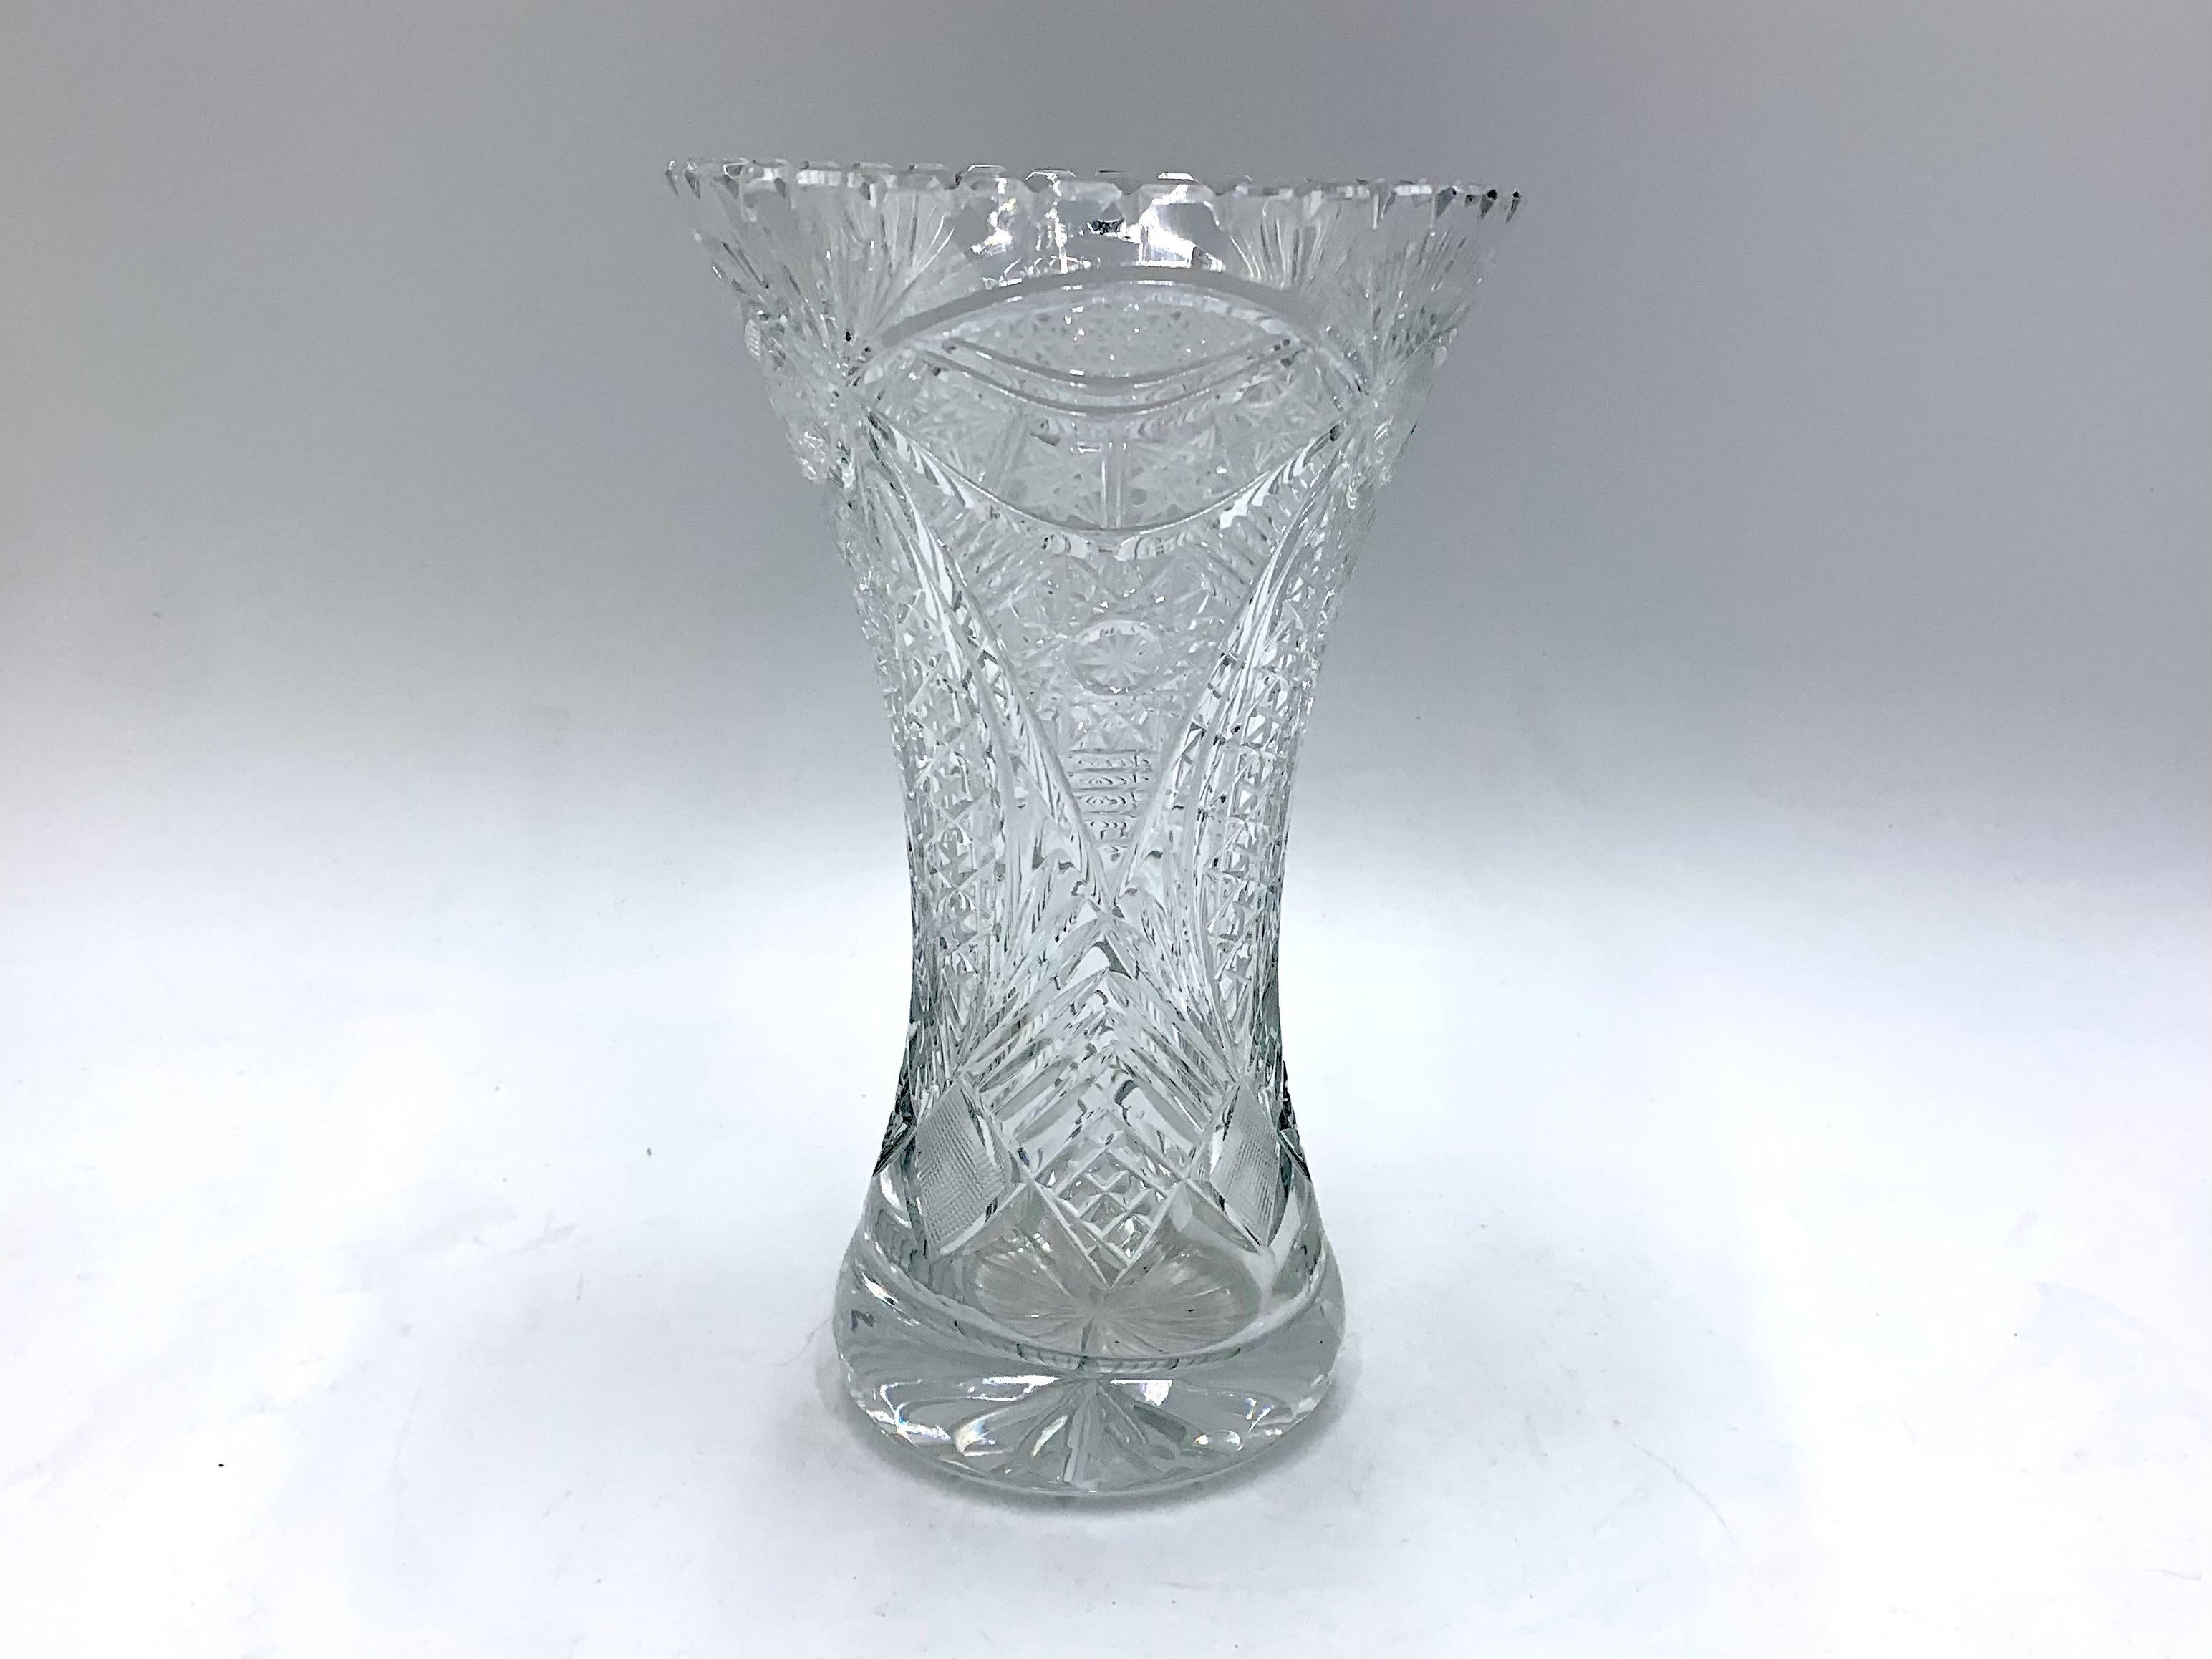 Vase made of crystal. The vase was produced in Poland in the 1960s and 1970s.
Vase in very good condition
Measures: Height 22cm / diameter 14 cm.